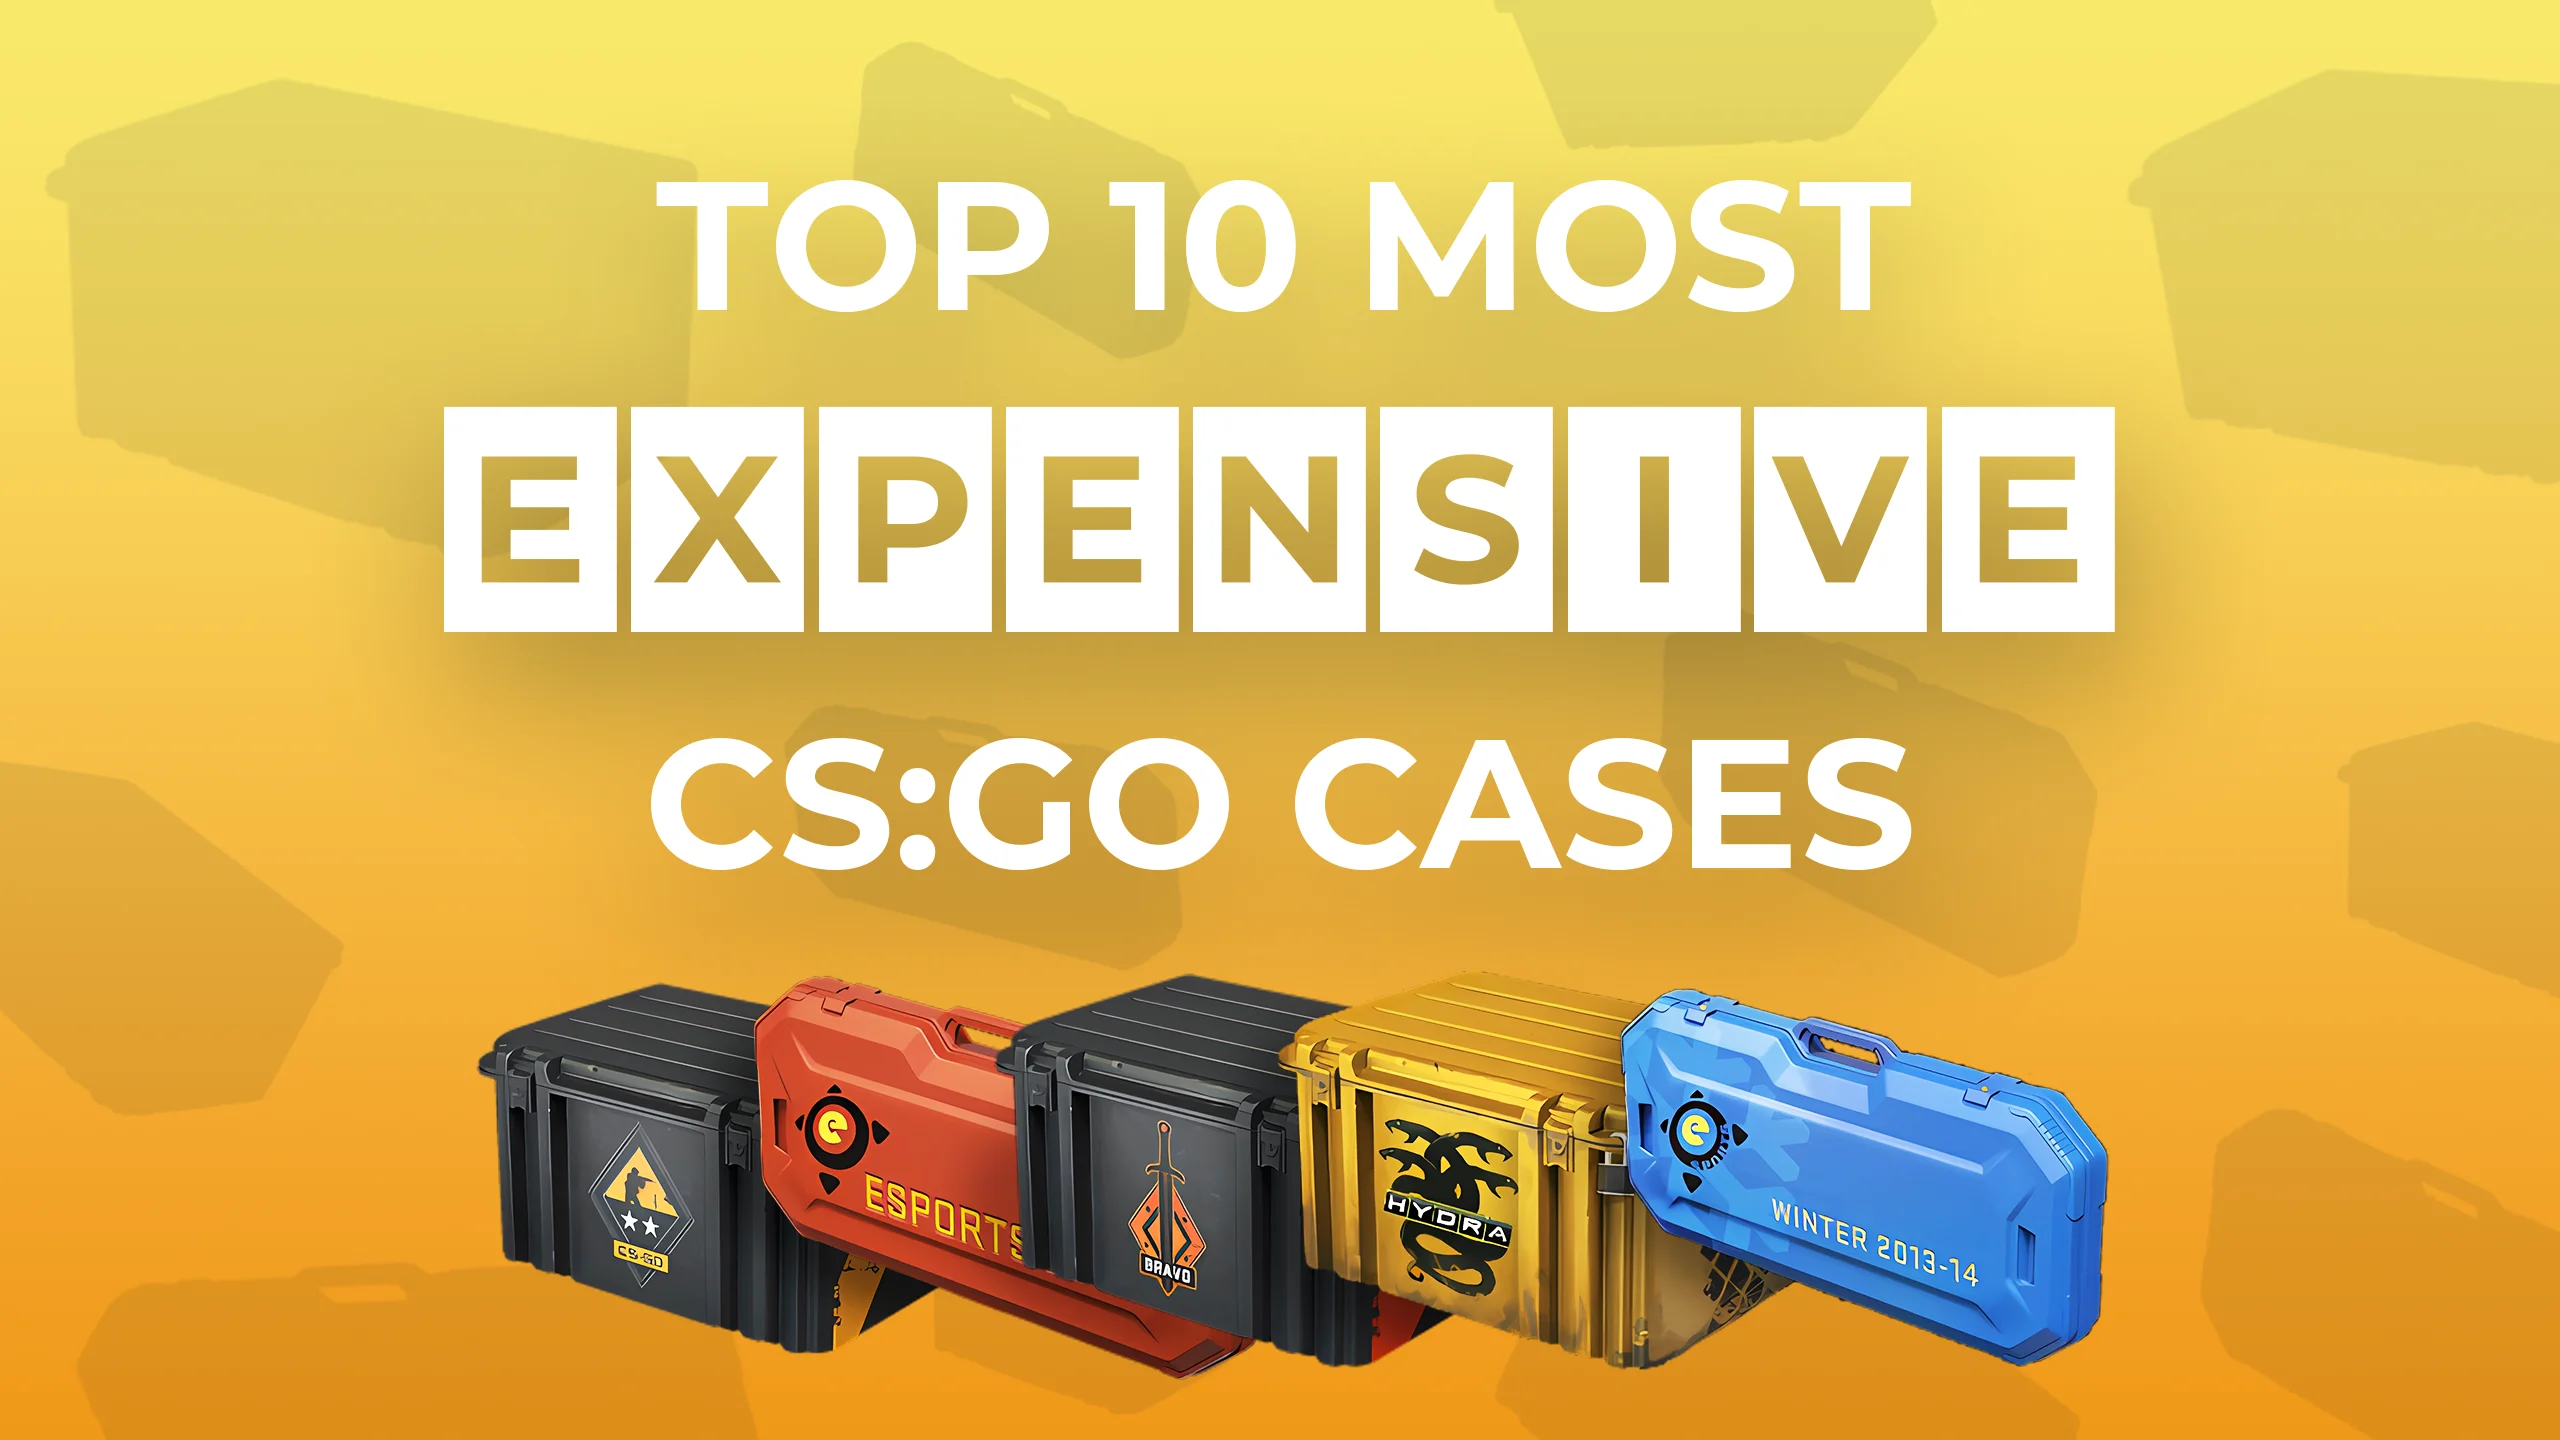 Top 10 Most Expensive CS:GO Cases